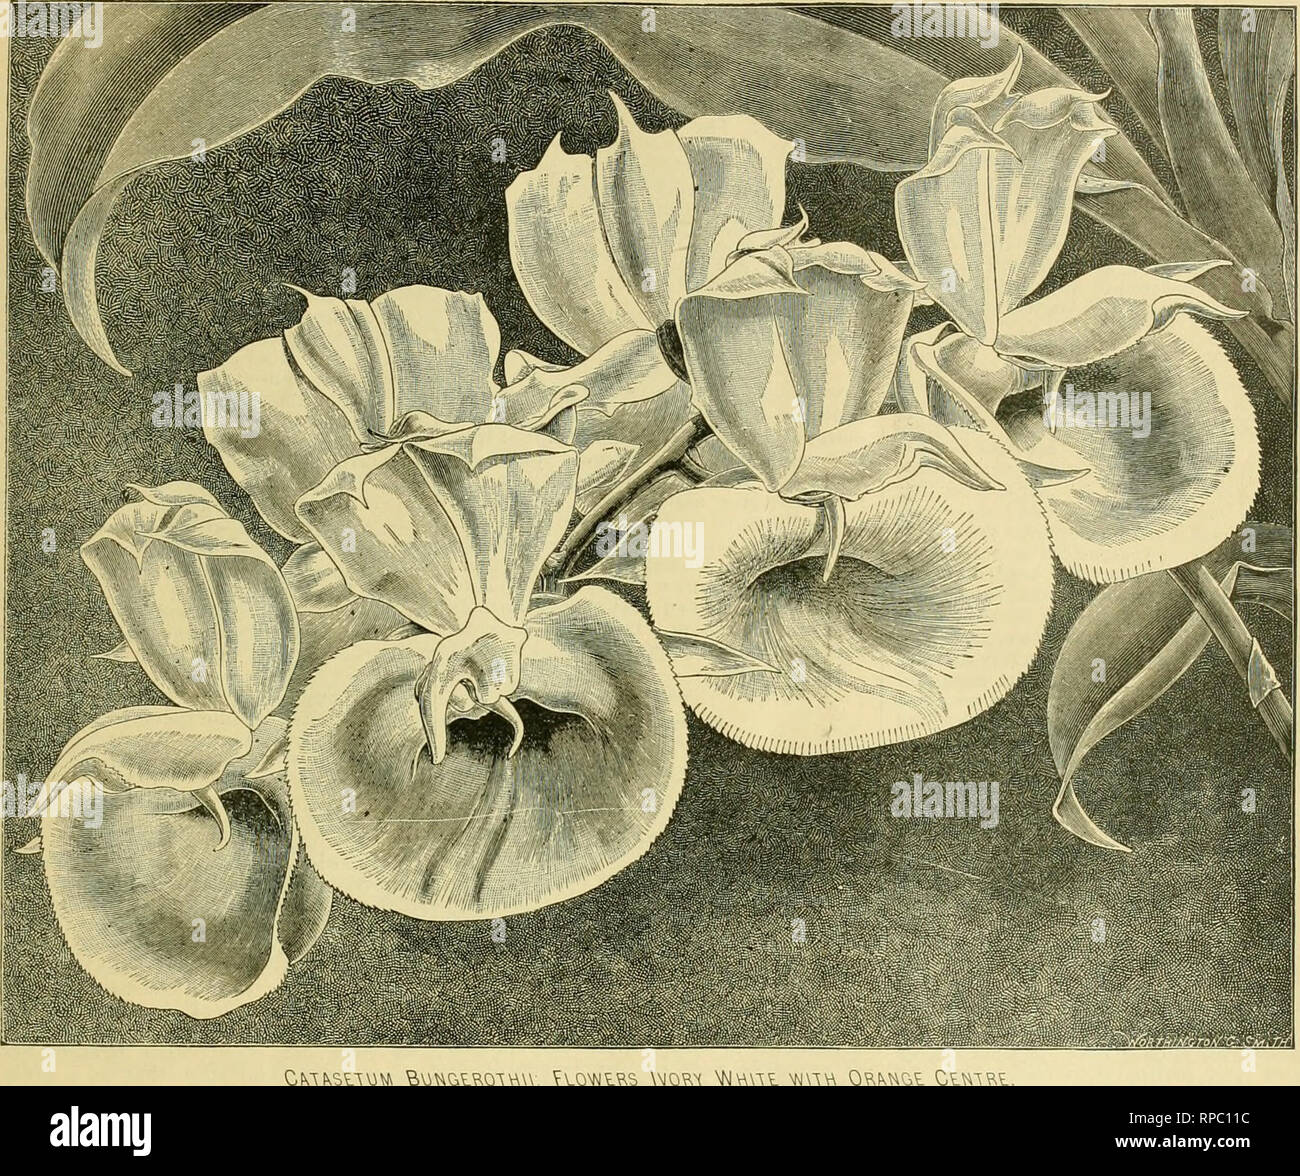 . The American florist : a weekly journal for the trade. Floriculture; Florists. 1887. The American Florist. 73. C M kStl 3 W QJ UG.LR01 Catasetum Bungerothii. The handsome illustration of this orchid was reproduced from the English Gar- dencr's Chronicle, which states that &quot;this catasetum is worthy of a place in the most select collections in virtue of its cup- shaped flowers, which are about four inches in diameter, ivorj' white of wax- like substance and of great beauty and durability. &quot; With respect to the catasetums gen- erally, it will not be saying too much to assert that th Stock Photo